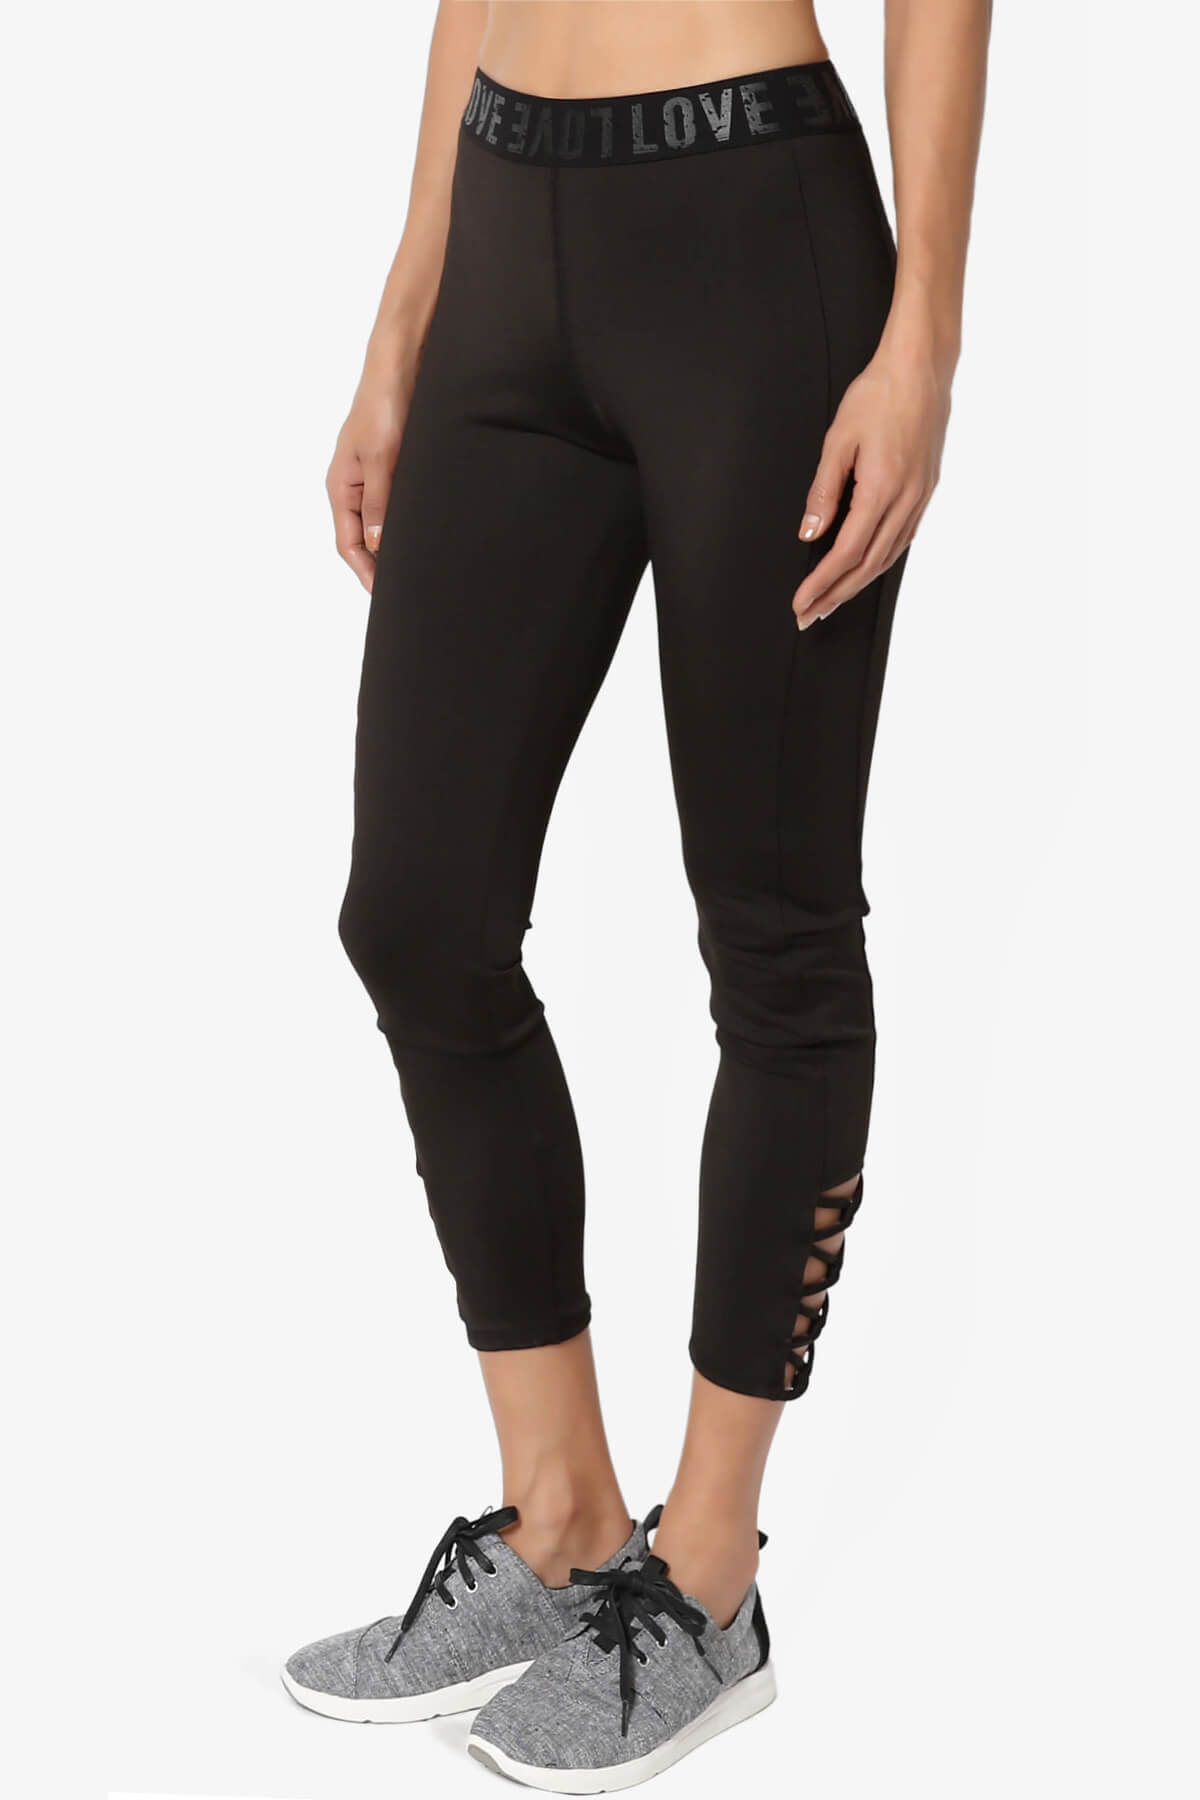 Load image into Gallery viewer, Reign Cutout Crop Yoga Leggings BLACK_3
